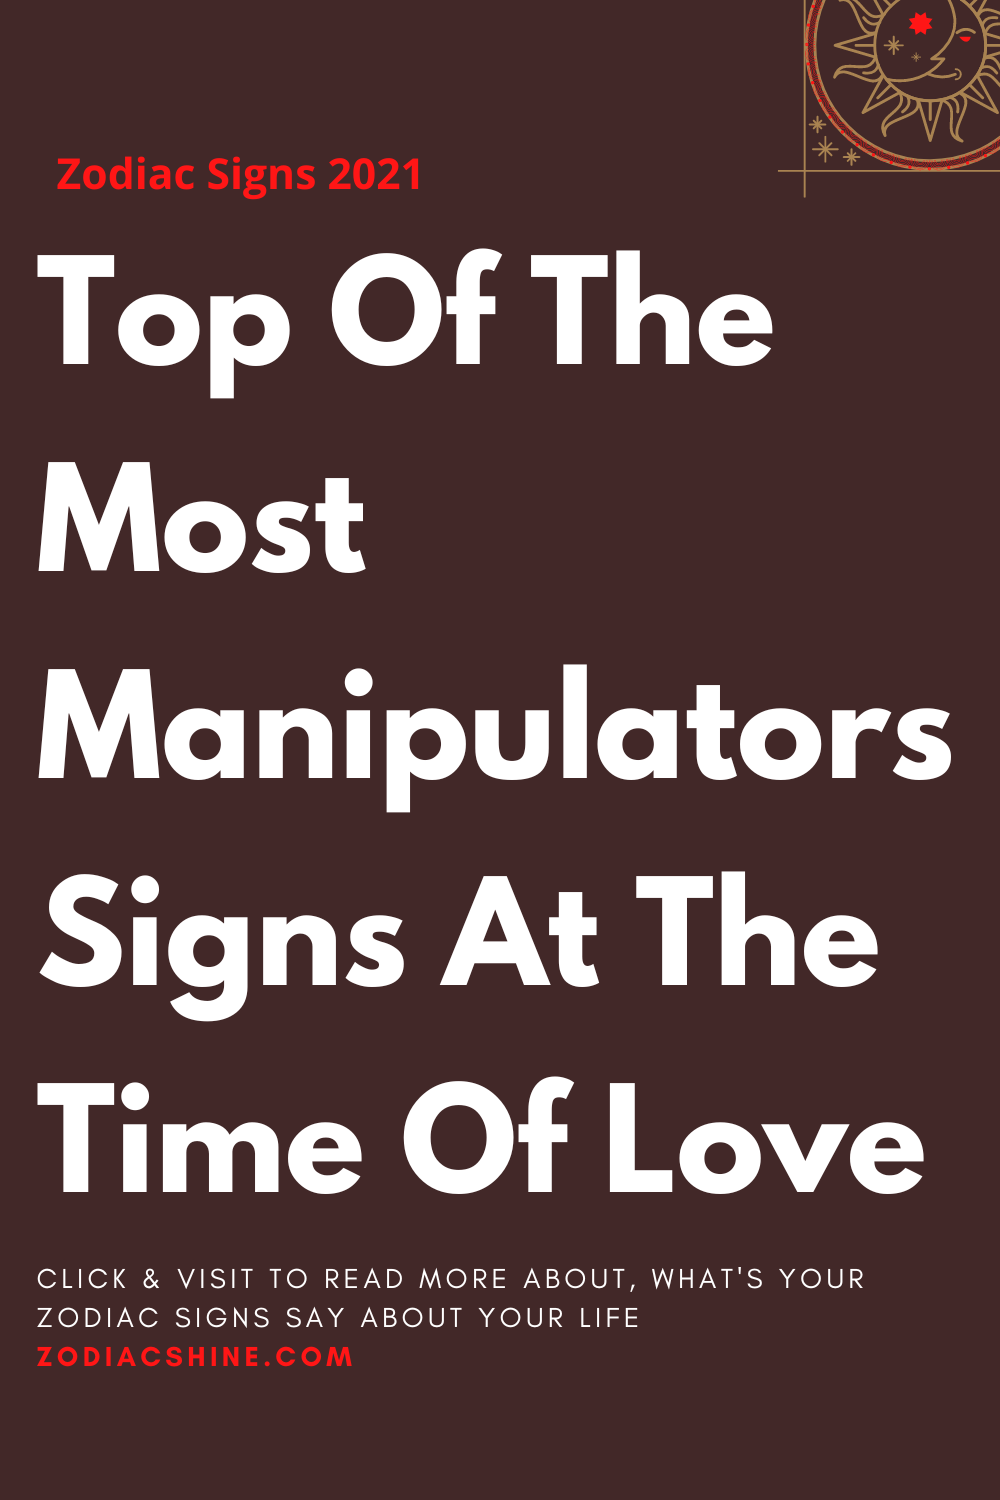 Top Of The Most Manipulators Signs At The Time Of Love